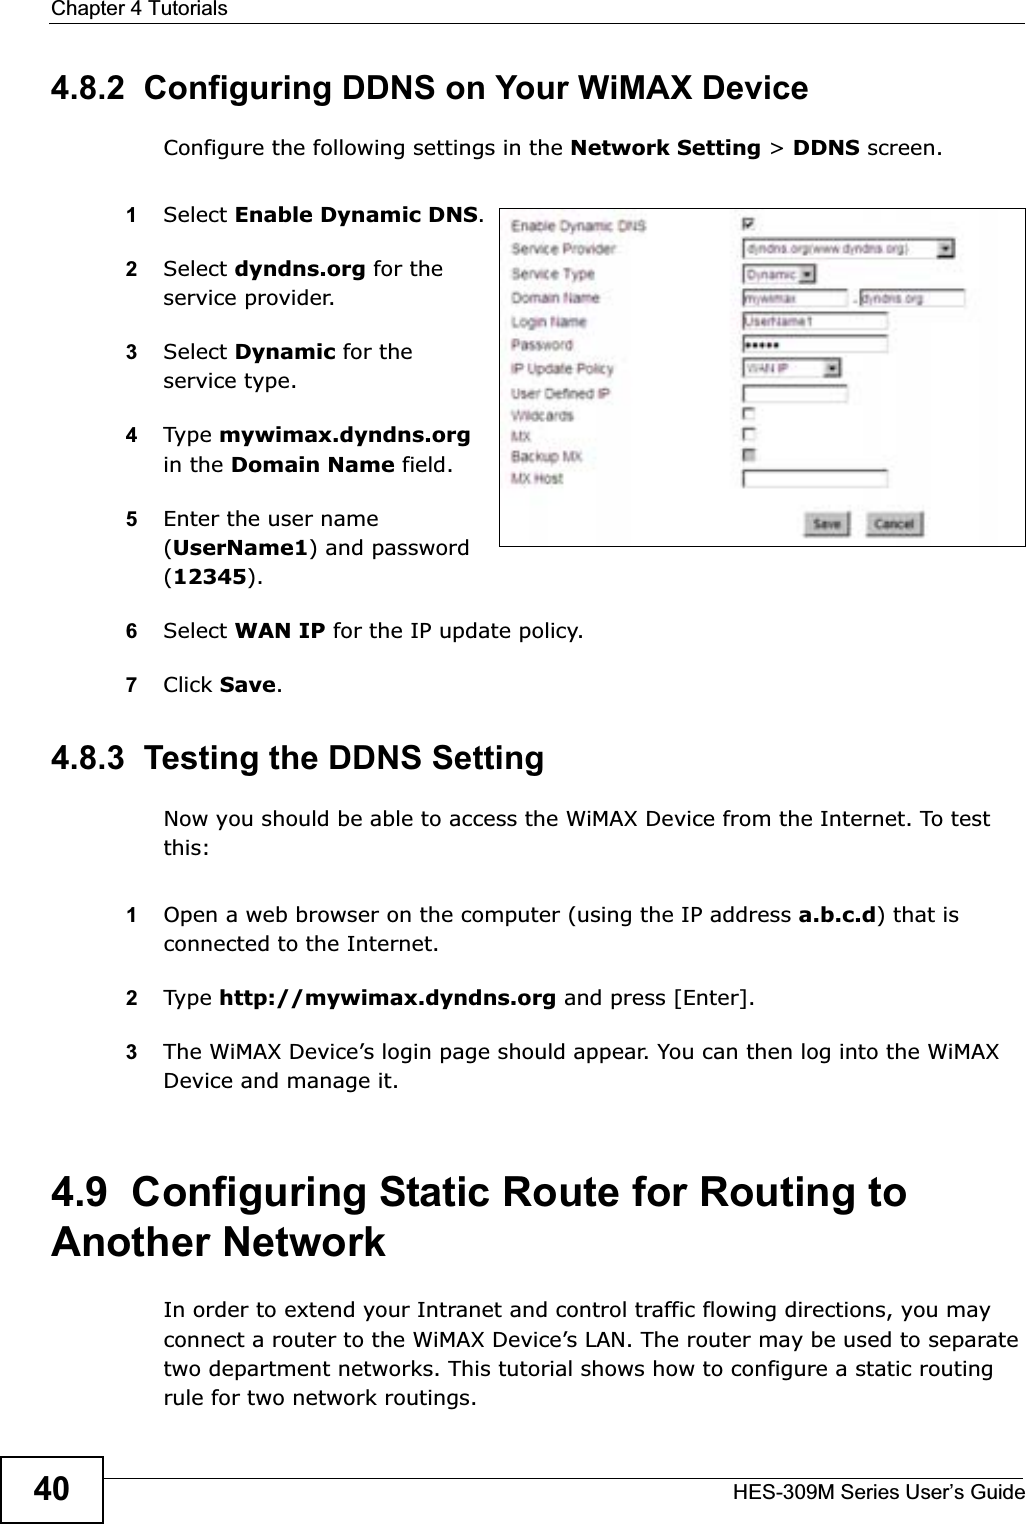 Chapter 4 TutorialsHES-309M Series User’s Guide404.8.2  Configuring DDNS on Your WiMAX DeviceConfigure the following settings in the Network Setting &gt; DDNS screen.1Select Enable Dynamic DNS.2Select dyndns.org for the service provider.3Select Dynamic for the service type.4Type mywimax.dyndns.orgin the Domain Name field.5Enter the user name (UserName1) and password (12345).6Select WAN IP for the IP update policy.7Click Save.4.8.3  Testing the DDNS SettingNow you should be able to access the WiMAX Device from the Internet. To test this:1Open a web browser on the computer (using the IP address a.b.c.d) that is connected to the Internet.2Type http://mywimax.dyndns.org and press [Enter].3The WiMAX Device’s login page should appear. You can then log into the WiMAX Device and manage it.4.9  Configuring Static Route for Routing to Another NetworkIn order to extend your Intranet and control traffic flowing directions, you may connect a router to the WiMAX Device’s LAN. The router may be used to separate two department networks. This tutorial shows how to configure a static routing rule for two network routings.